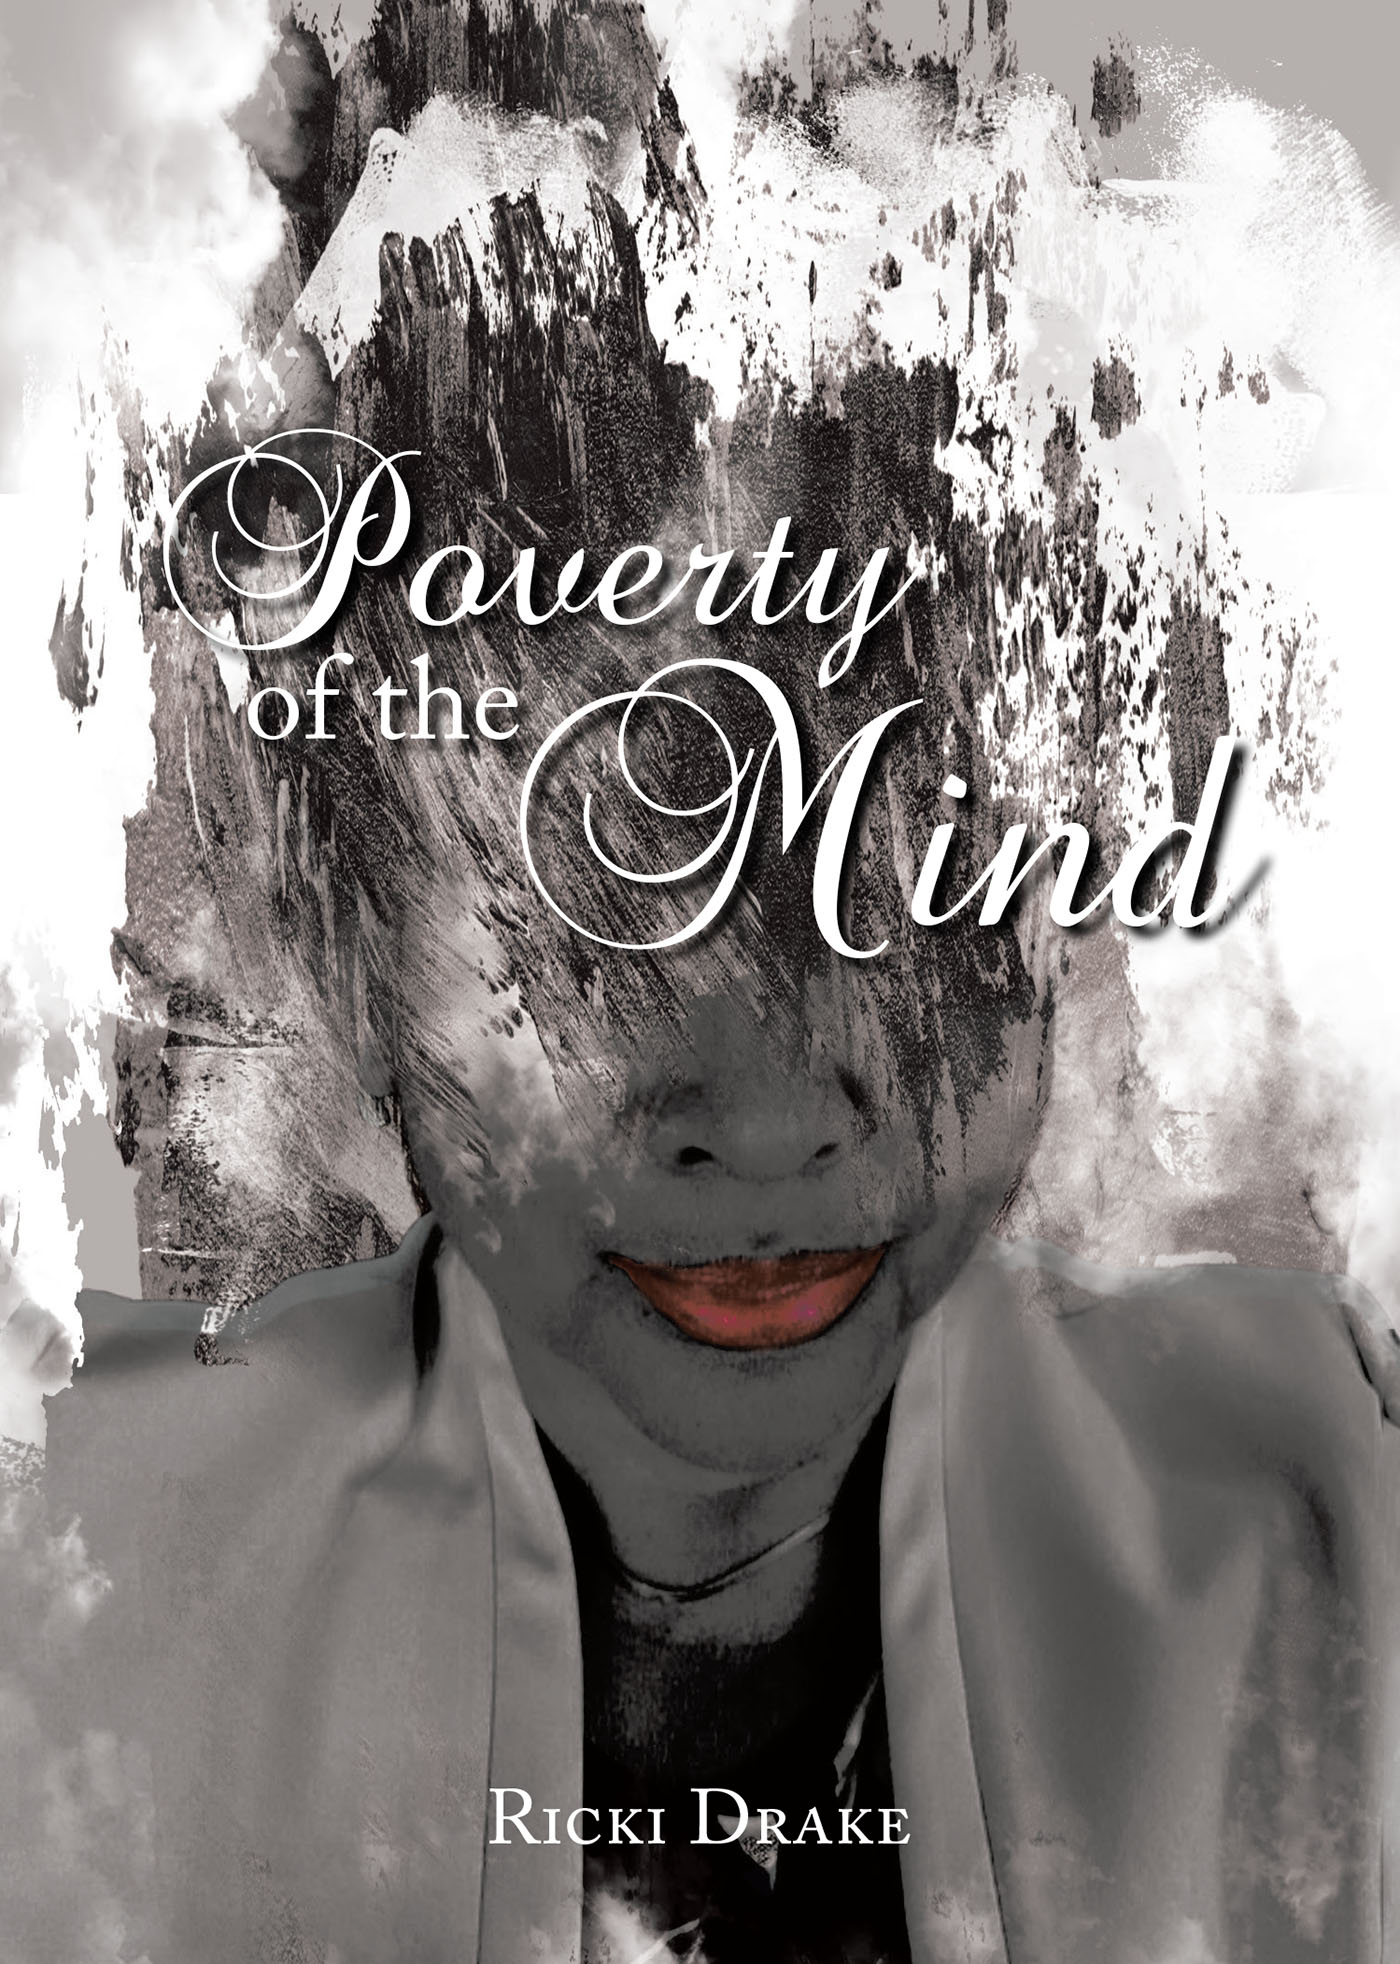 Ricki Drake’s Newly Released "Poverty of the Mind" is a Compelling Autobiographical Work That Raises Awareness of the Lasting Effects of Abuse